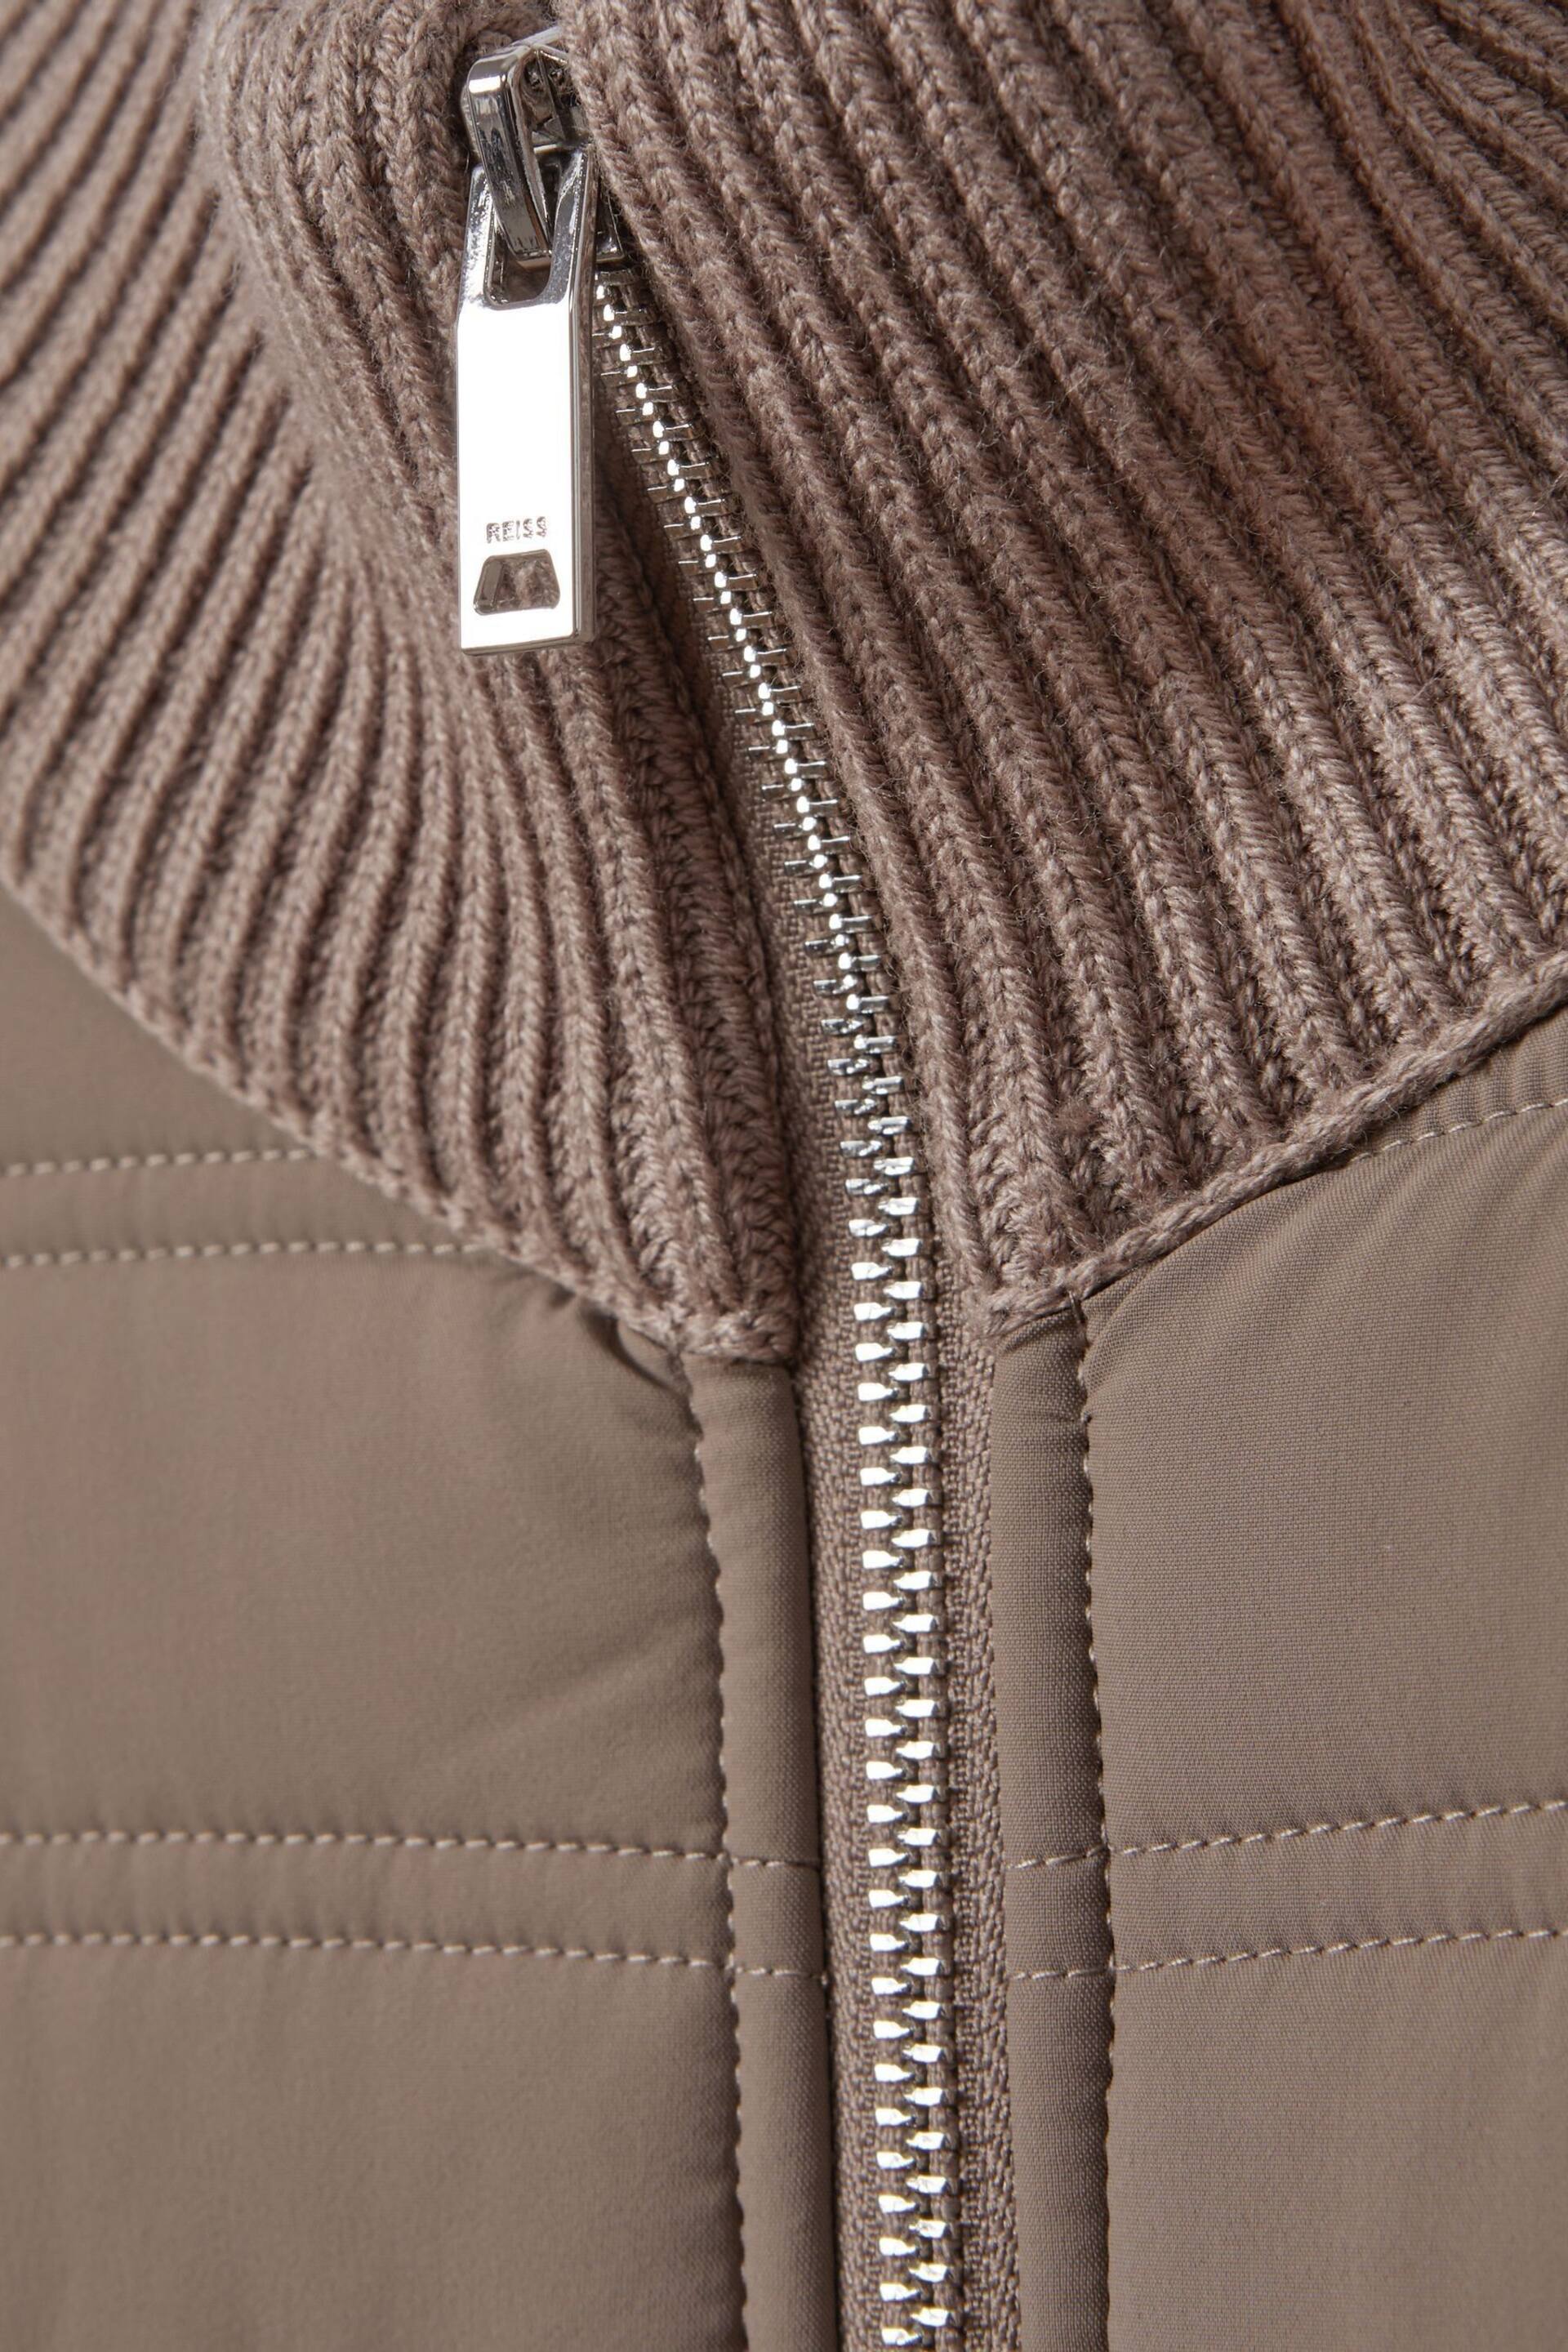 Reiss Mink Southend Hybrid Quilt and Knit Zip-Through Jacket - Image 6 of 6